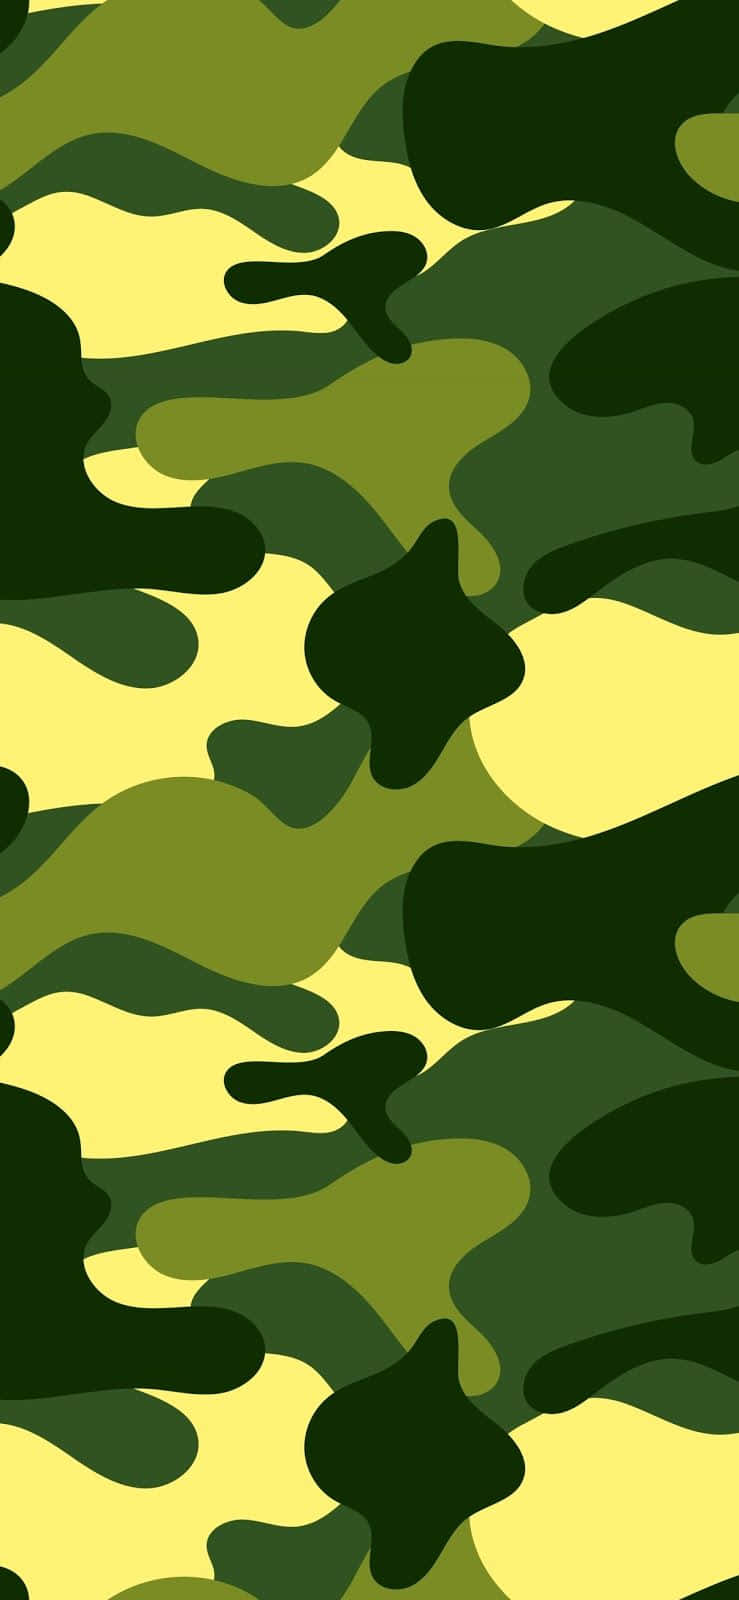 Download A Green And Yellow Camouflage Pattern Wallpaper | Wallpapers.com